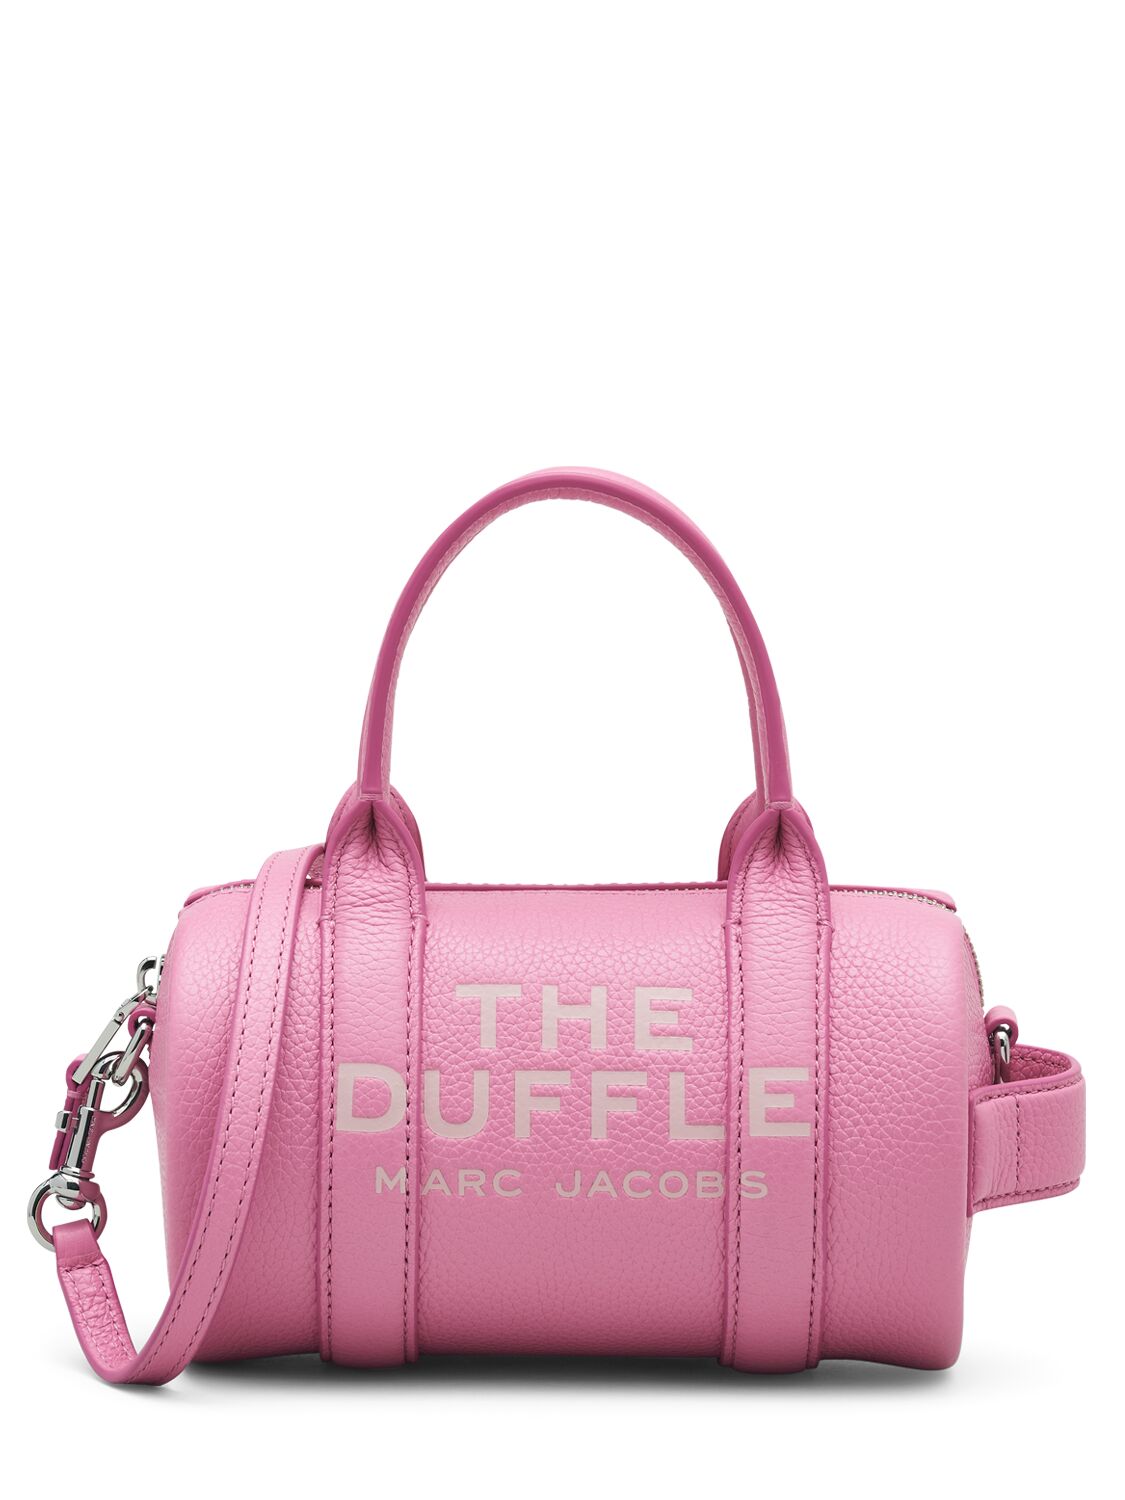 Marc Jacobs The Mini Duffle Leather Bag In Petal Pink